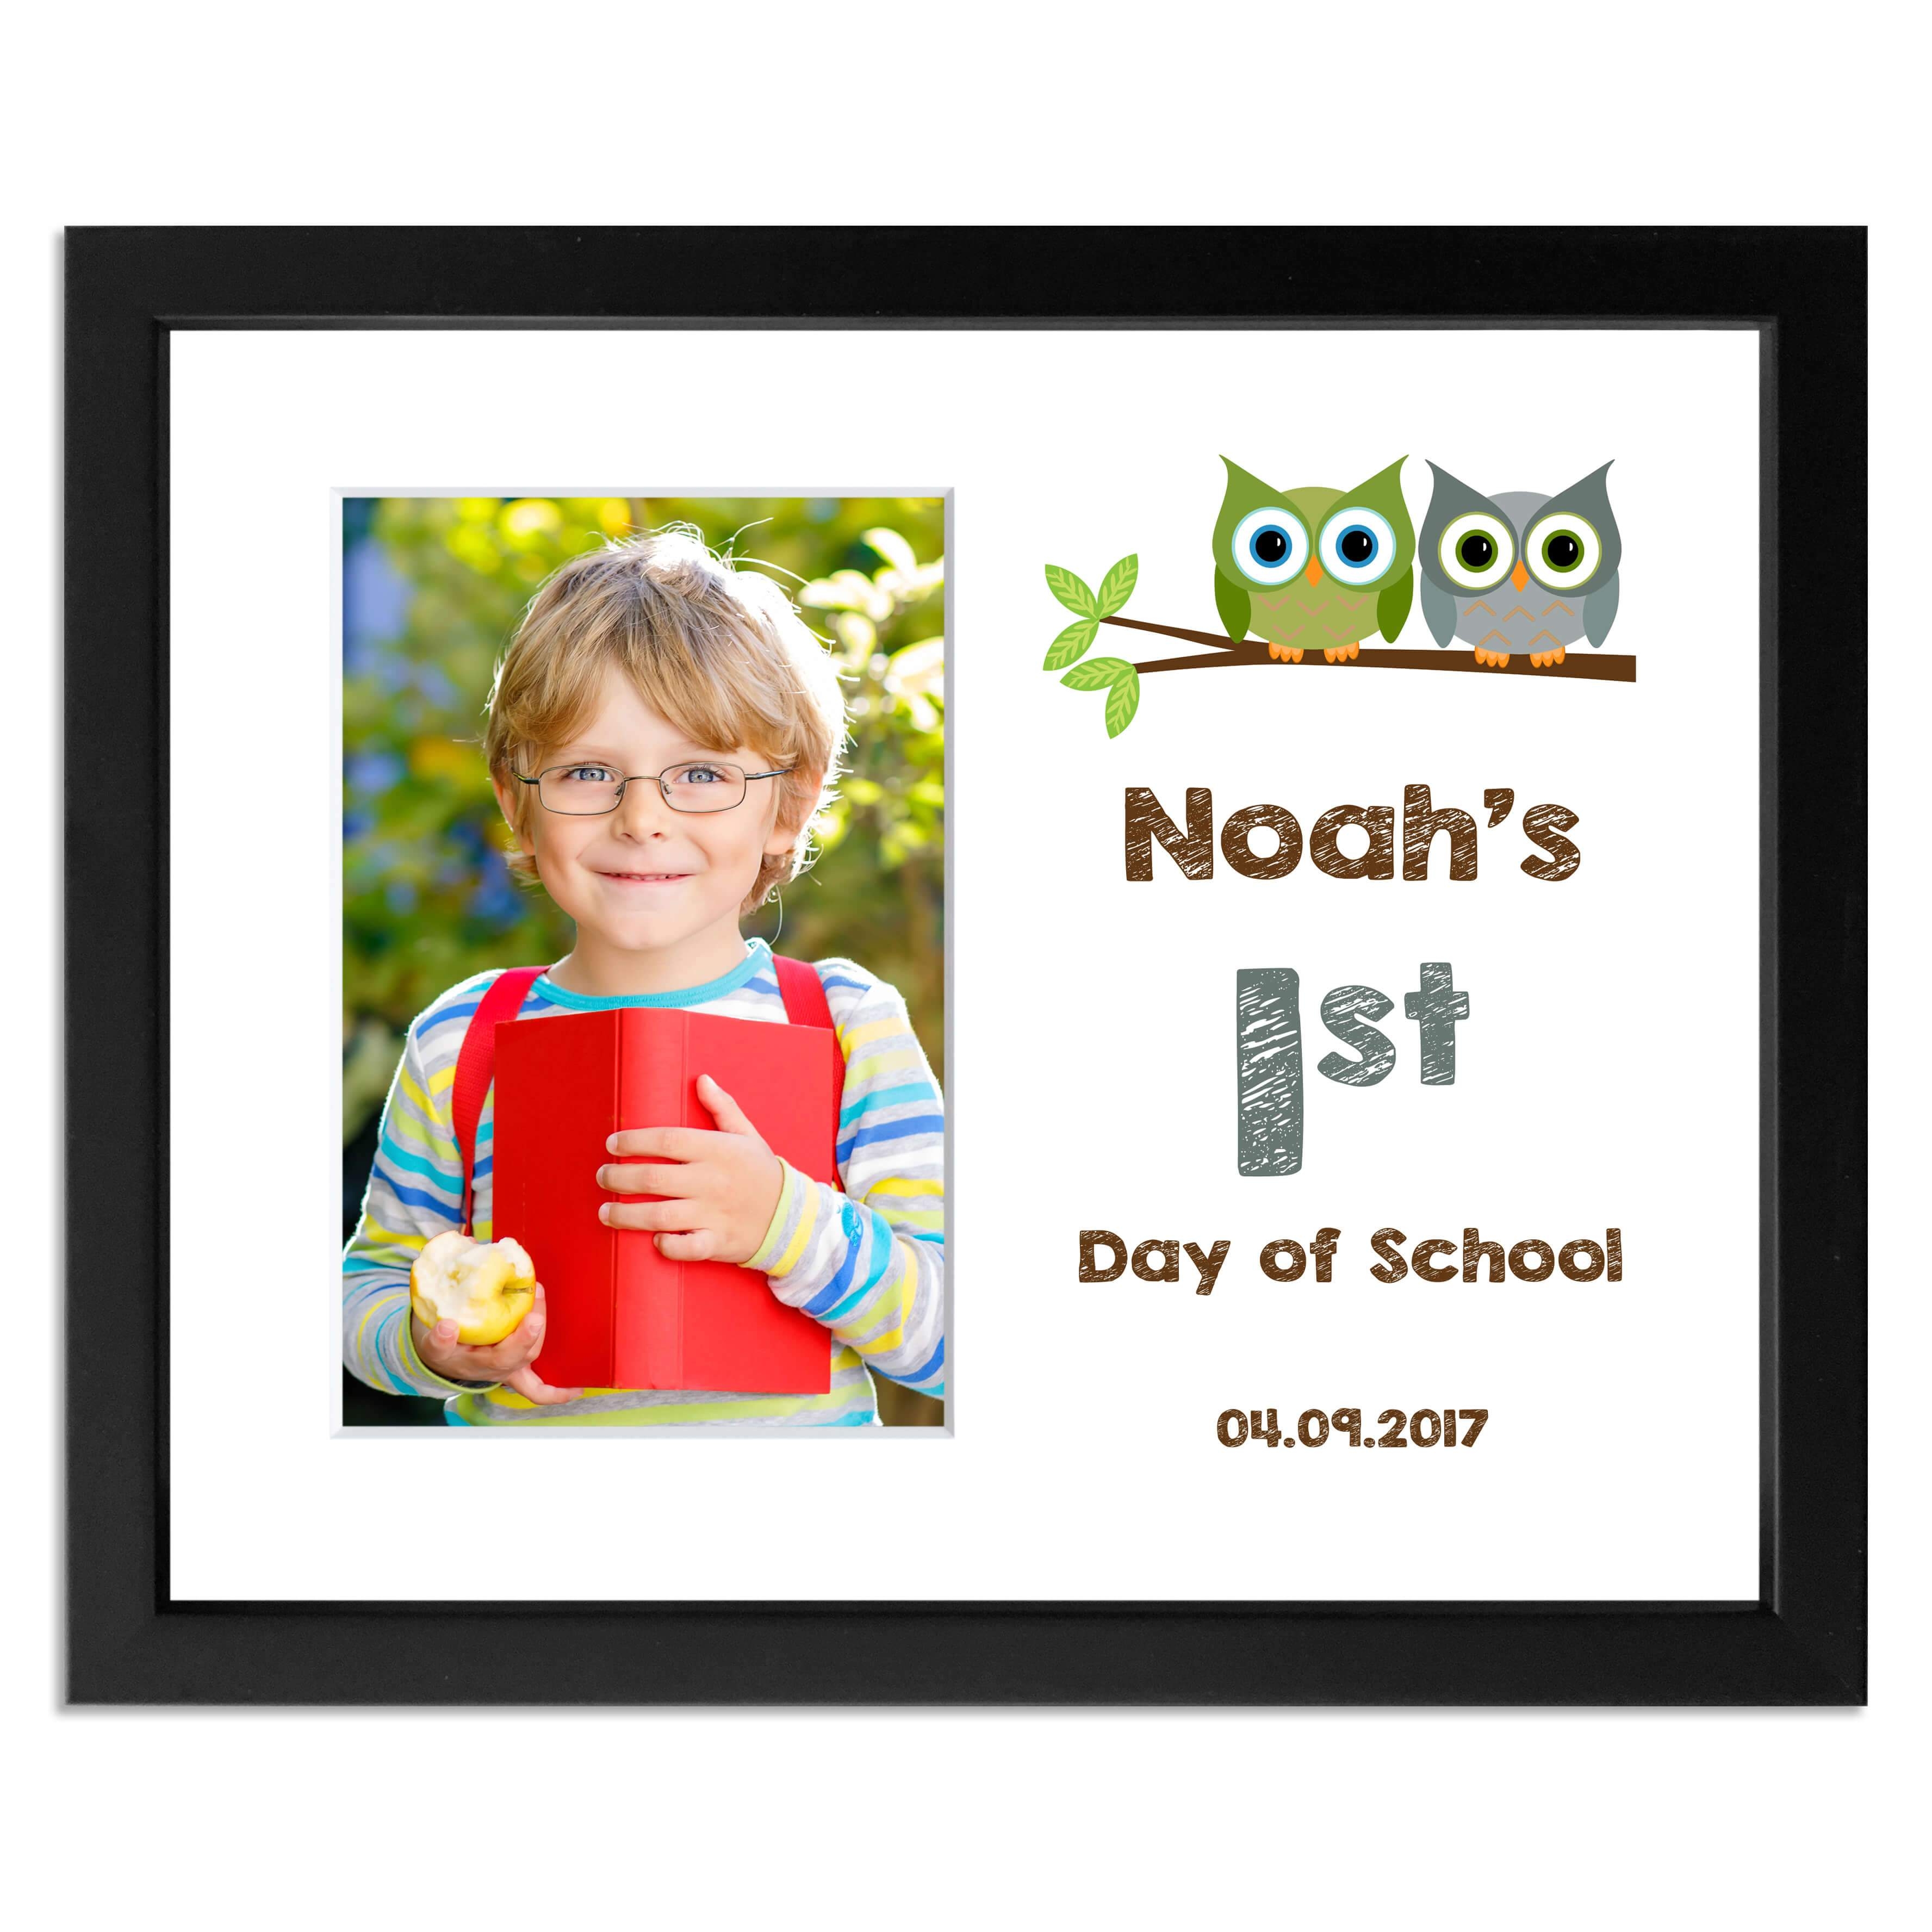 Personalised First Day of School/Back to School Photo Frame with Owl Motive for 6×4/4x6in photo